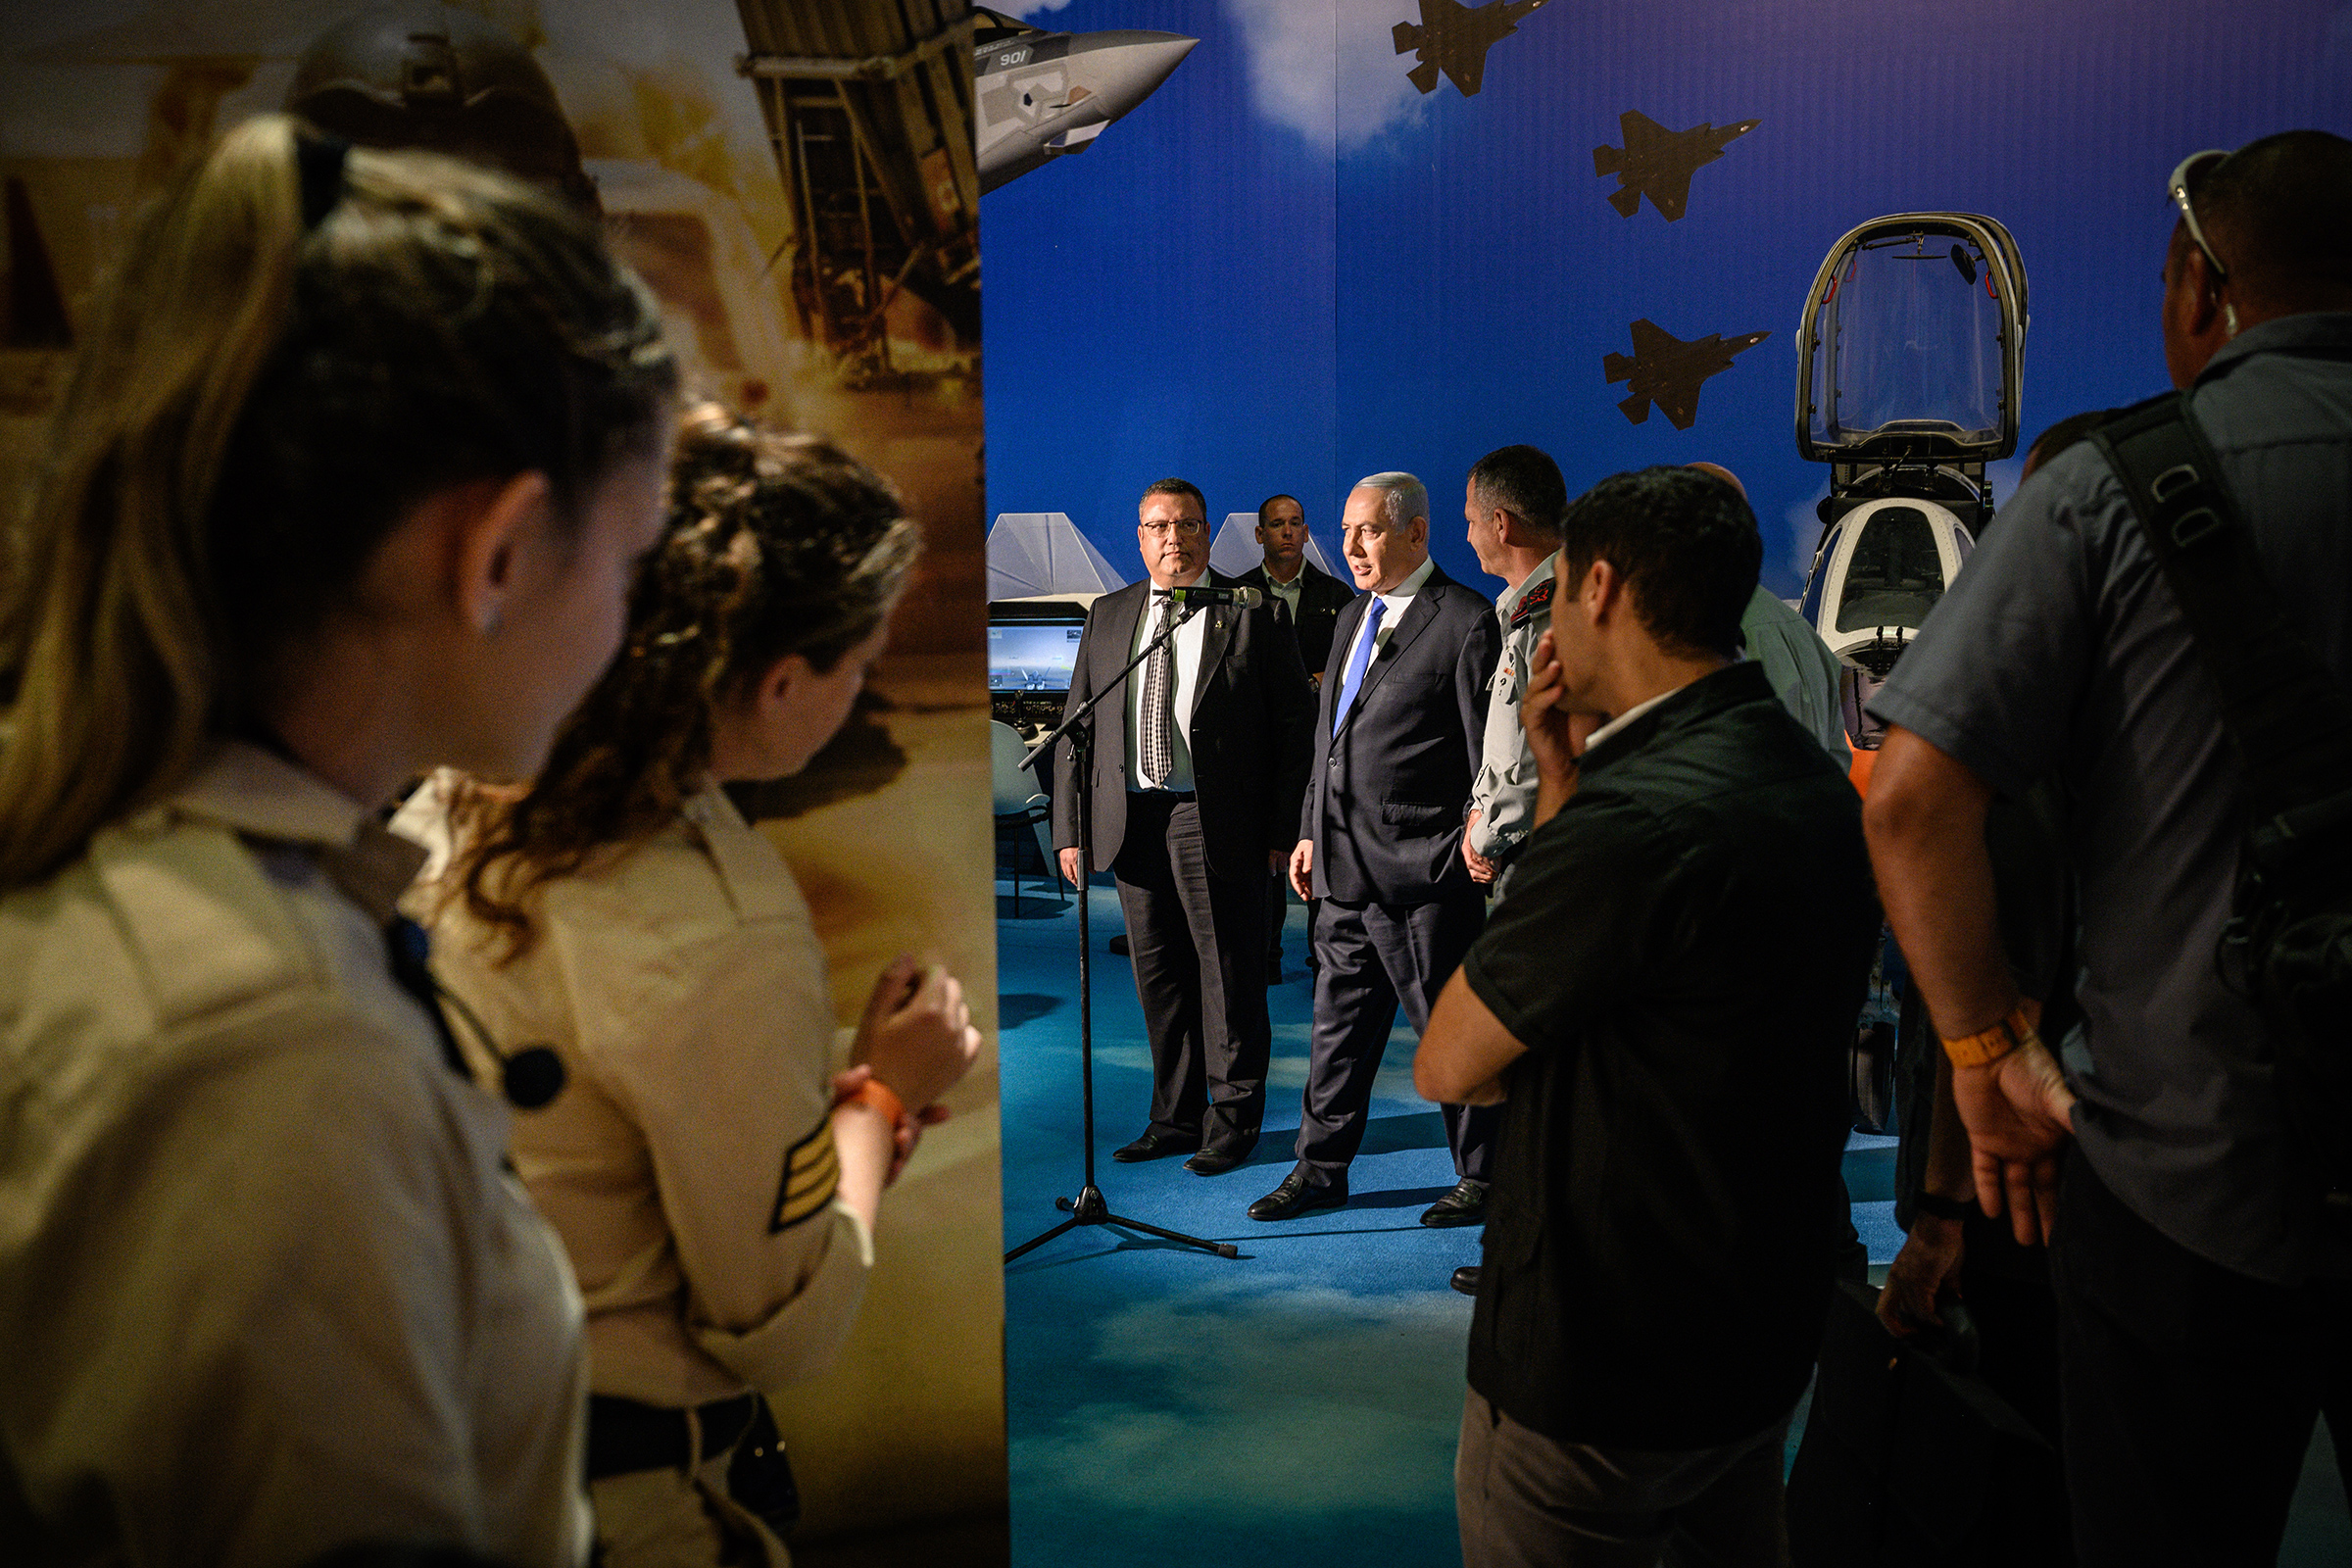 Netanyahu opens an exhibit on the Israel Defense Forces, a driver behind the nation’s booming tech sector. (Yuri Kozyrev—NOOR for TIME)